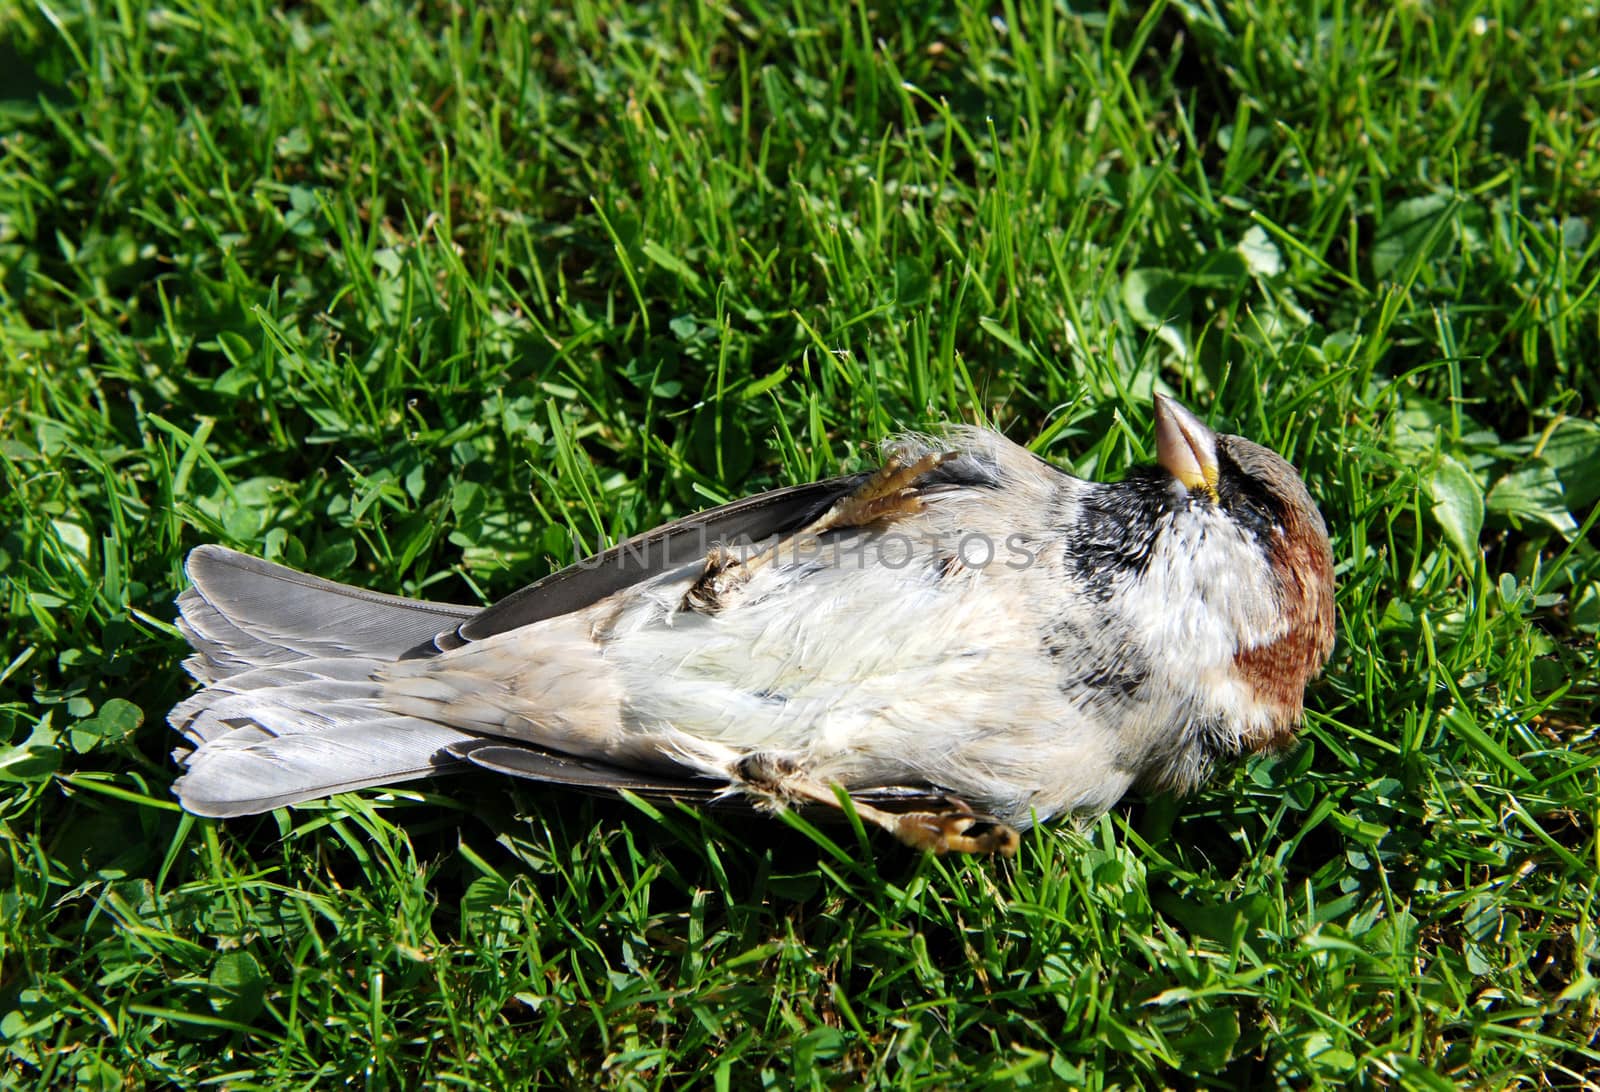 Dead tree sparrow lying on its back on grass